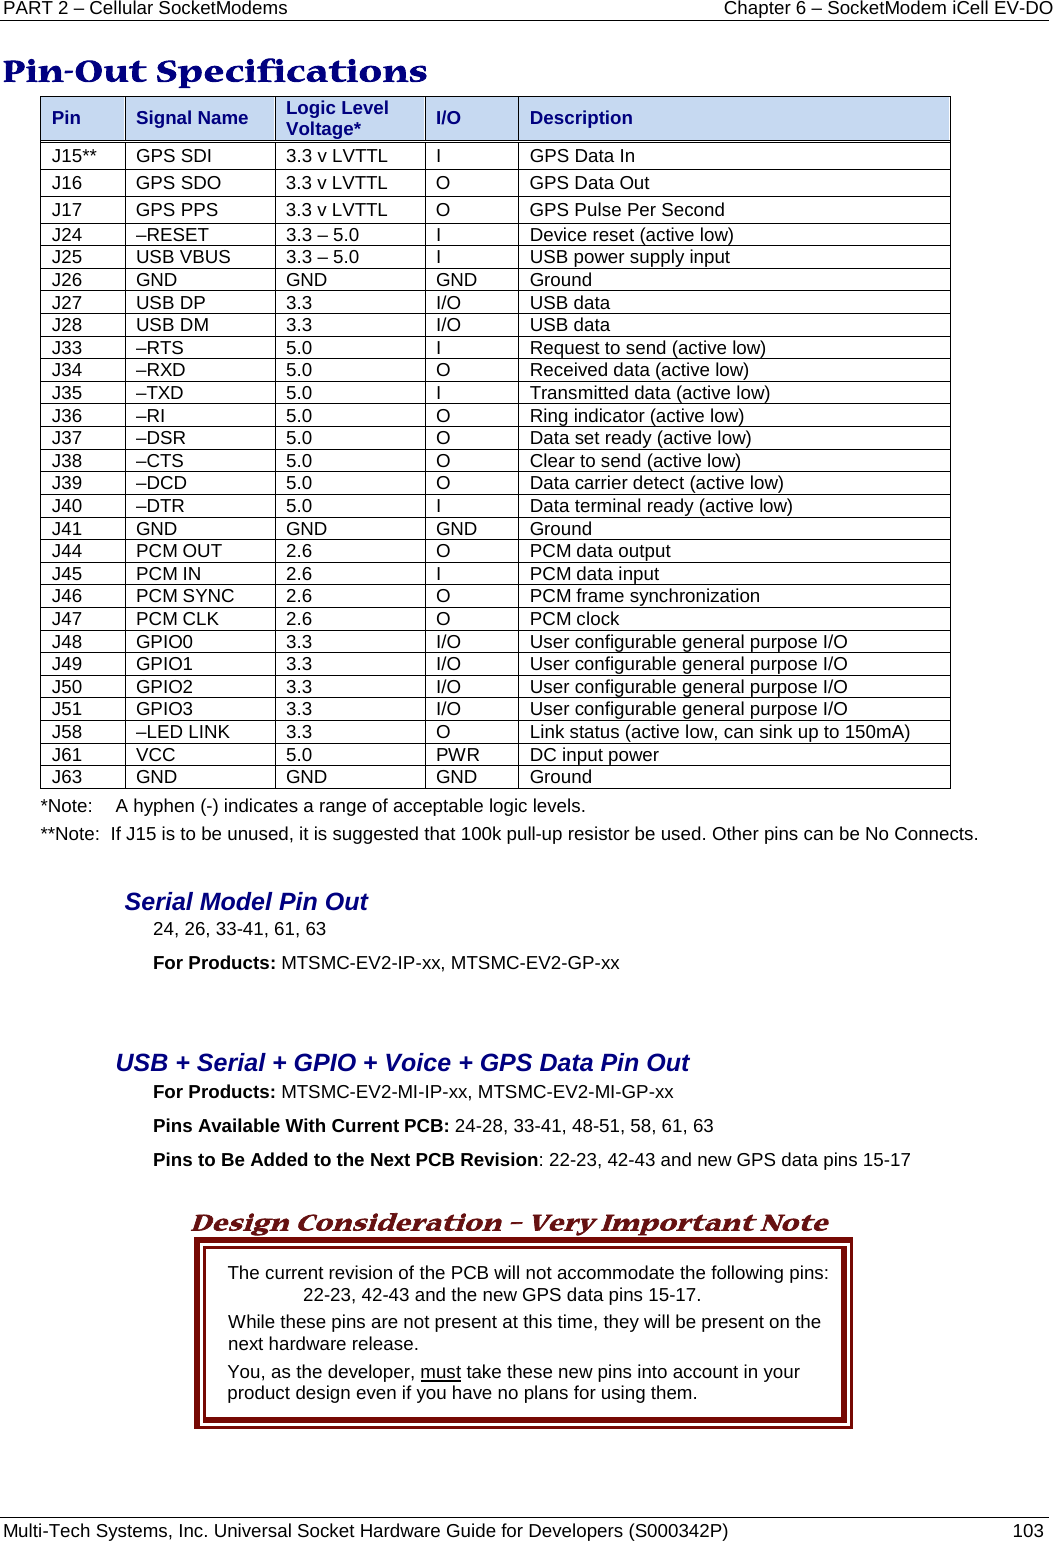 PART 2 – Cellular SocketModems Chapter 6 – SocketModem iCell EV-DO Multi-Tech Systems, Inc. Universal Socket Hardware Guide for Developers (S000342P)  103  Pin-Out Specifications  Pin  Signal Name Logic Level Voltage* I/O Description J15** GPS SDI 3.3 v LVTTL  I  GPS Data In J16 GPS SDO 3.3 v LVTTL  O  GPS Data Out J17 GPS PPS 3.3 v LVTTL  O  GPS Pulse Per Second J24 –RESET 3.3 – 5.0 I Device reset (active low) J25 USB VBUS 3.3 – 5.0 I USB power supply input J26 GND GND GND Ground J27 USB DP 3.3 I/O USB data J28 USB DM 3.3 I/O USB data J33 –RTS 5.0 I Request to send (active low) J34 –RXD 5.0 O Received data (active low) J35 –TXD 5.0 I Transmitted data (active low) J36 –RI 5.0 O Ring indicator (active low) J37 –DSR 5.0 O Data set ready (active low) J38 –CTS 5.0 O Clear to send (active low) J39 –DCD 5.0 O Data carrier detect (active low) J40 –DTR 5.0 I Data terminal ready (active low) J41 GND GND GND Ground J44 PCM OUT 2.6 O PCM data output J45 PCM IN 2.6 I PCM data input J46 PCM SYNC 2.6 O PCM frame synchronization J47 PCM CLK 2.6 O PCM clock J48 GPIO0 3.3 I/O User configurable general purpose I/O J49 GPIO1 3.3 I/O User configurable general purpose I/O J50 GPIO2 3.3 I/O User configurable general purpose I/O J51 GPIO3 3.3 I/O User configurable general purpose I/O J58 –LED LINK 3.3 O Link status (active low, can sink up to 150mA) J61 VCC 5.0 PWR DC input power J63 GND GND GND Ground *Note: A hyphen (-) indicates a range of acceptable logic levels. **Note:  If J15 is to be unused, it is suggested that 100k pull-up resistor be used. Other pins can be No Connects.   Serial Model Pin Out 24, 26, 33-41, 61, 63 For Products: MTSMC-EV2-IP-xx, MTSMC-EV2-GP-xx   USB + Serial + GPIO + Voice + GPS Data Pin Out For Products: MTSMC-EV2-MI-IP-xx, MTSMC-EV2-MI-GP-xx  Pins Available With Current PCB: 24-28, 33-41, 48-51, 58, 61, 63 Pins to Be Added to the Next PCB Revision: 22-23, 42-43 and new GPS data pins 15-17  Design Consideration – Very Important Note The current revision of the PCB will not accommodate the following pins:  22-23, 42-43 and the new GPS data pins 15-17.   While these pins are not present at this time, they will be present on the next hardware release.   You, as the developer, must take these new pins into account in your product design even if you have no plans for using them.      